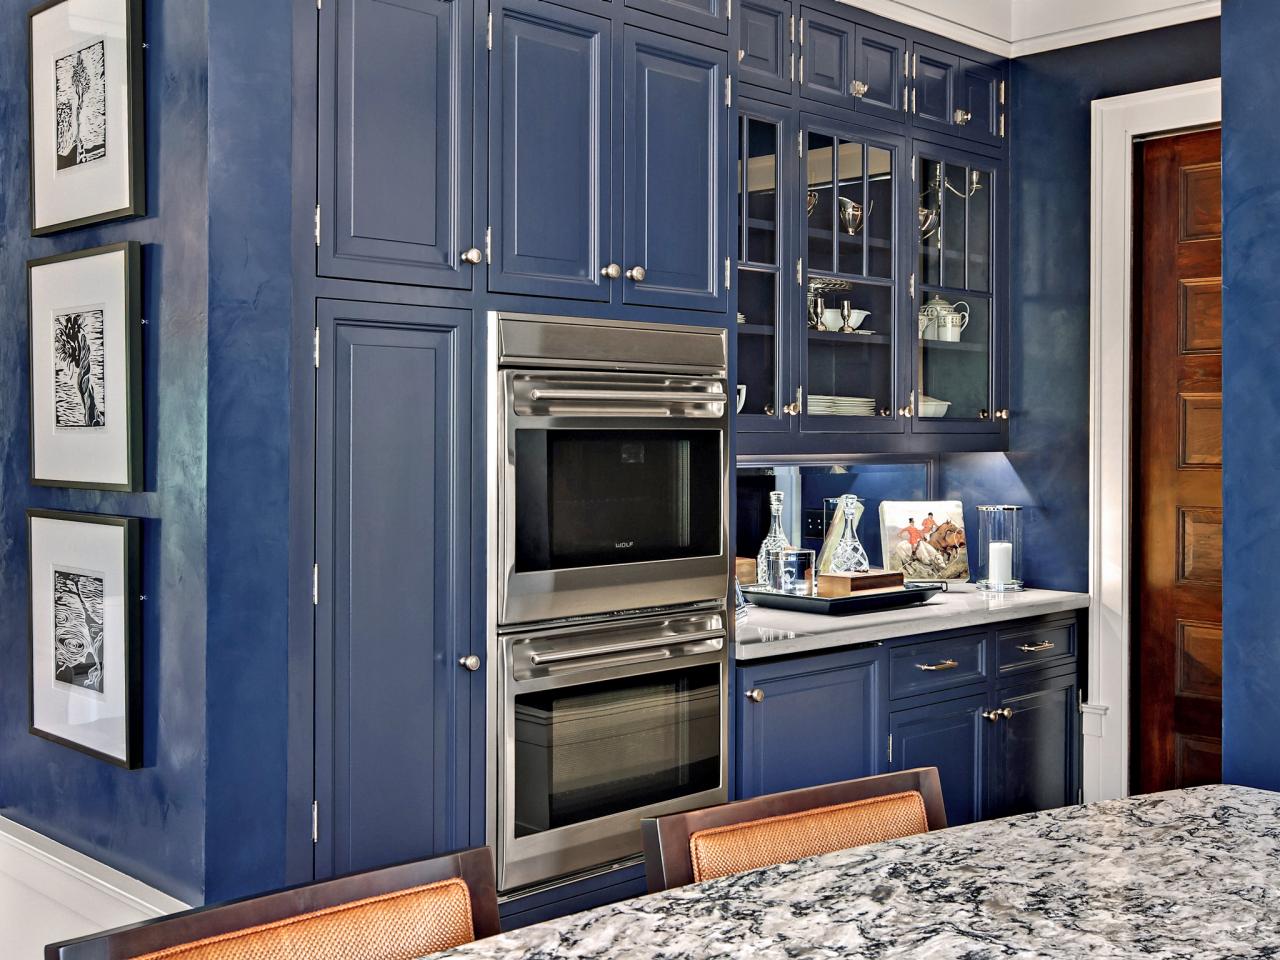 Painting Kitchen Cabinets Pictures Options Tips Ideas HGTV